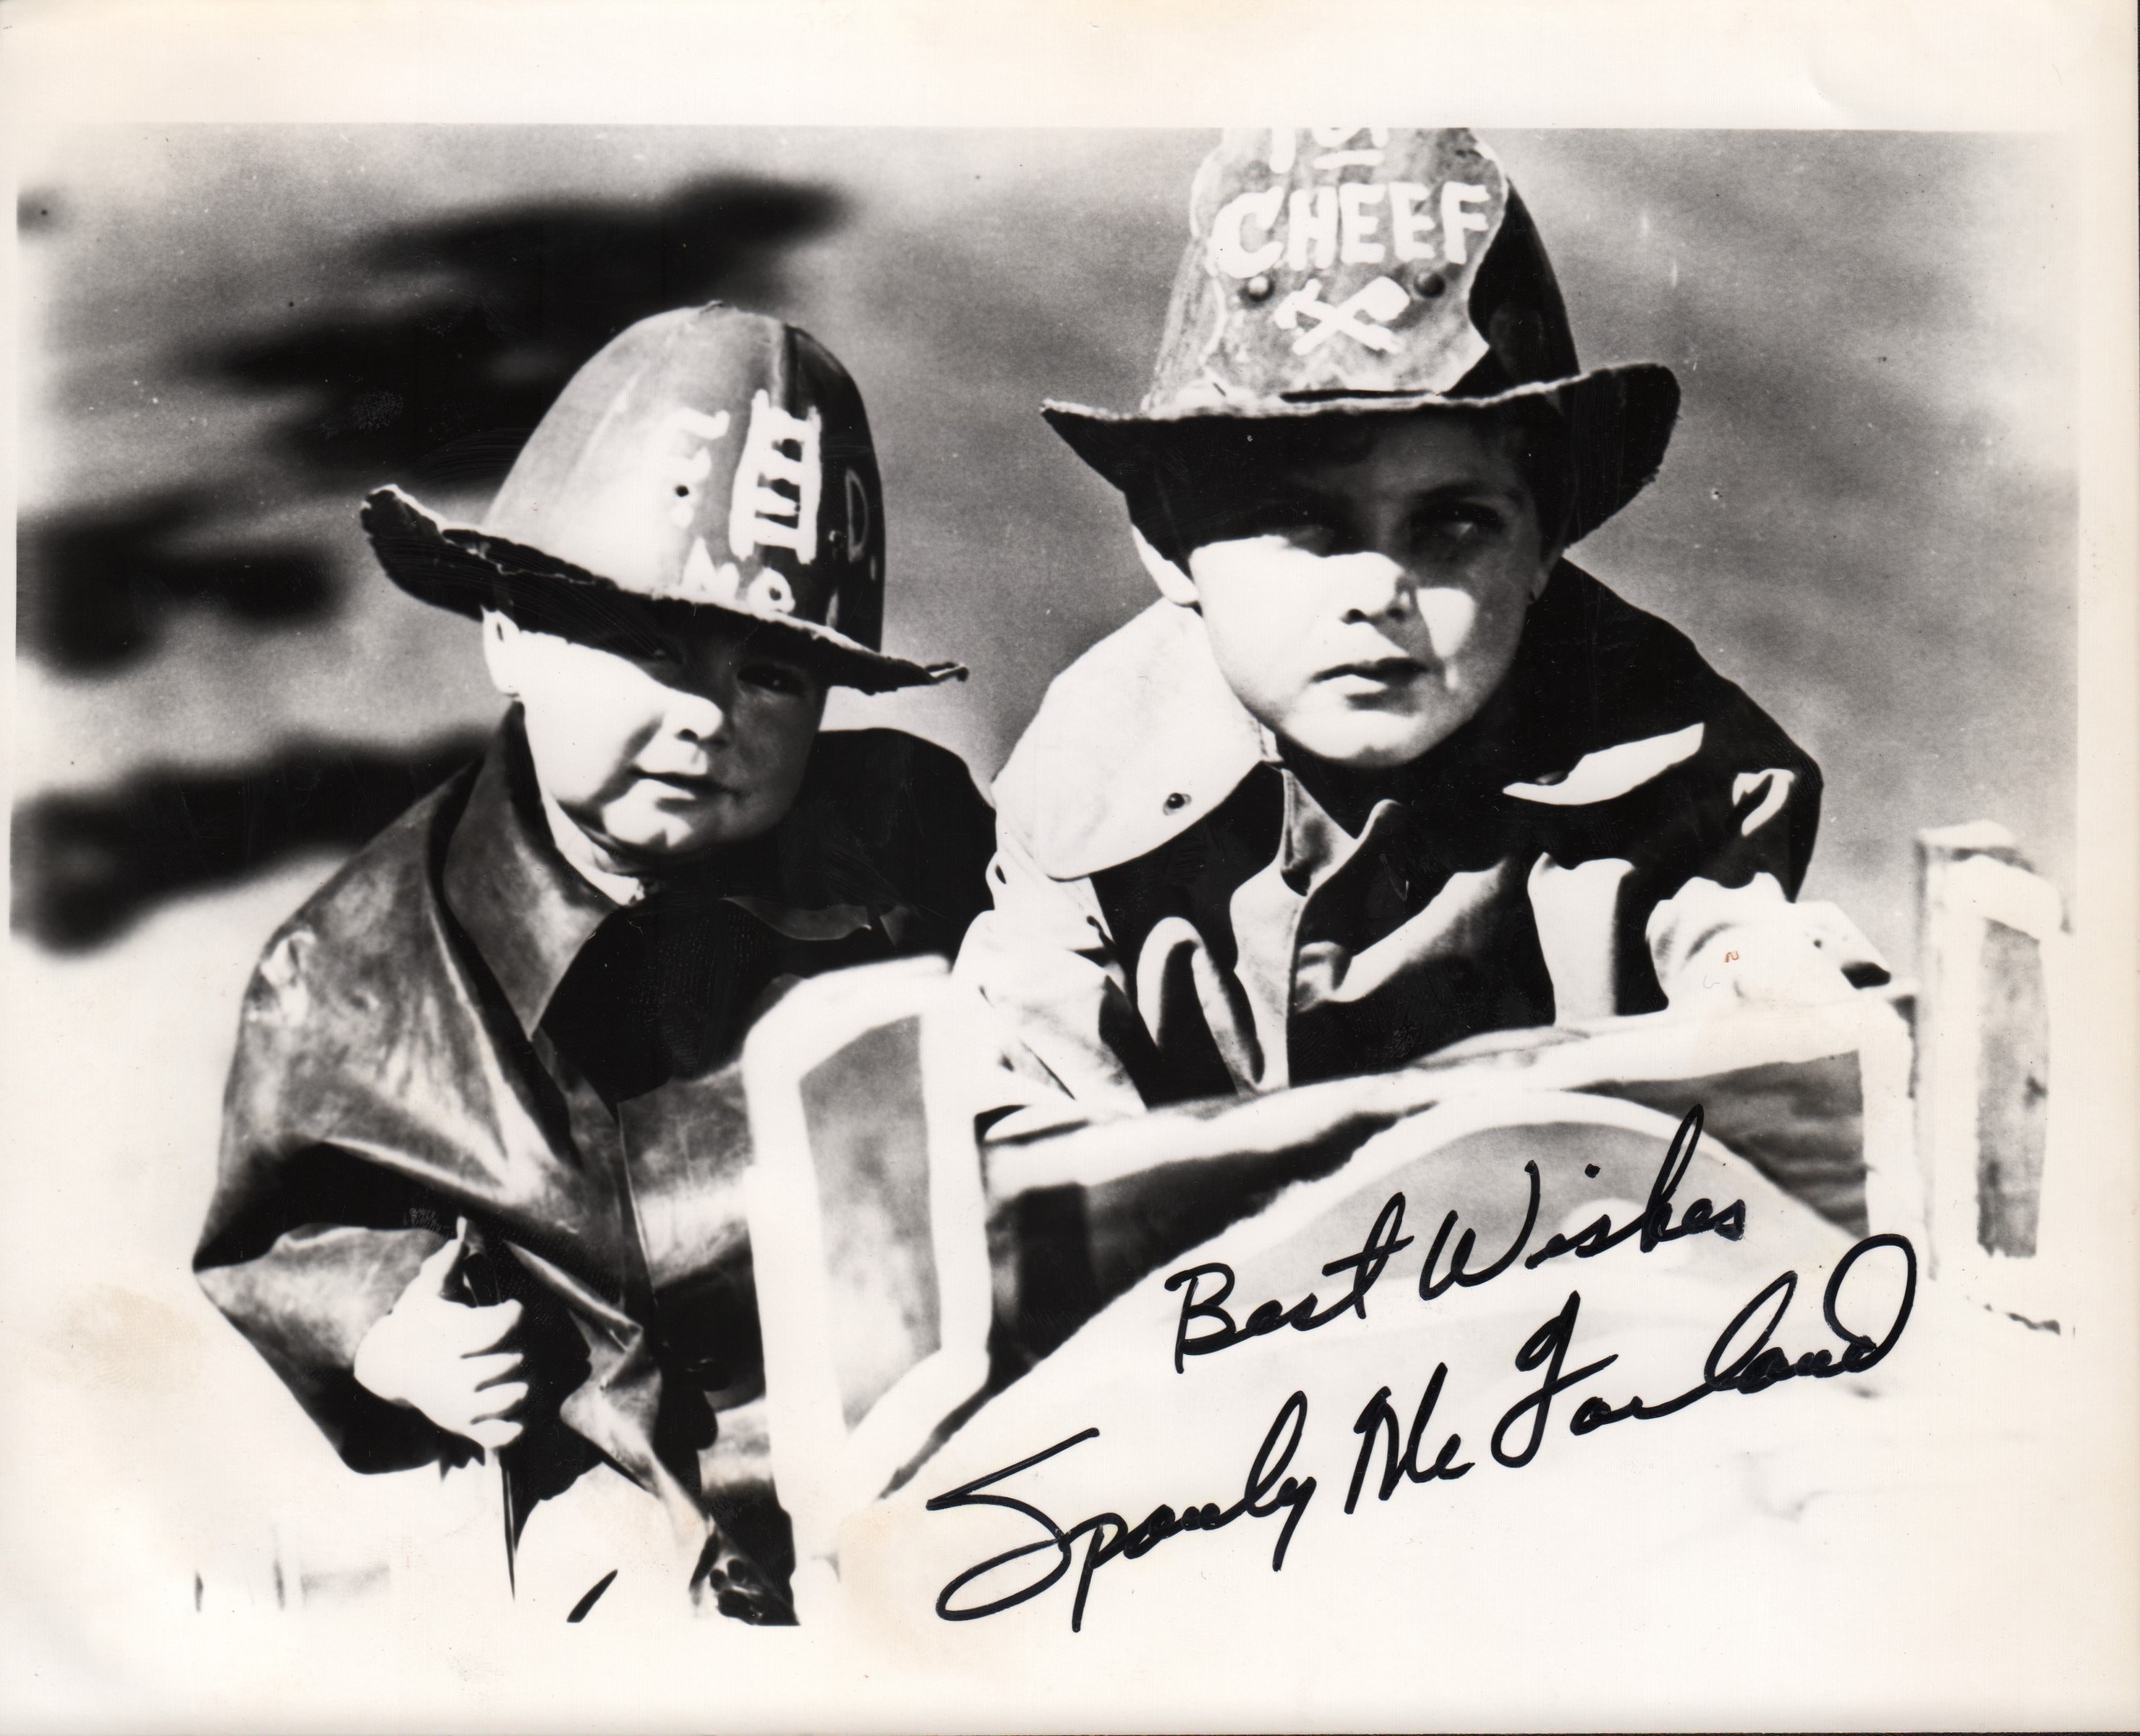 Rock And Pop Culture - Our Gang's Spanky McFarland Signed Photo (PSA/DNA)